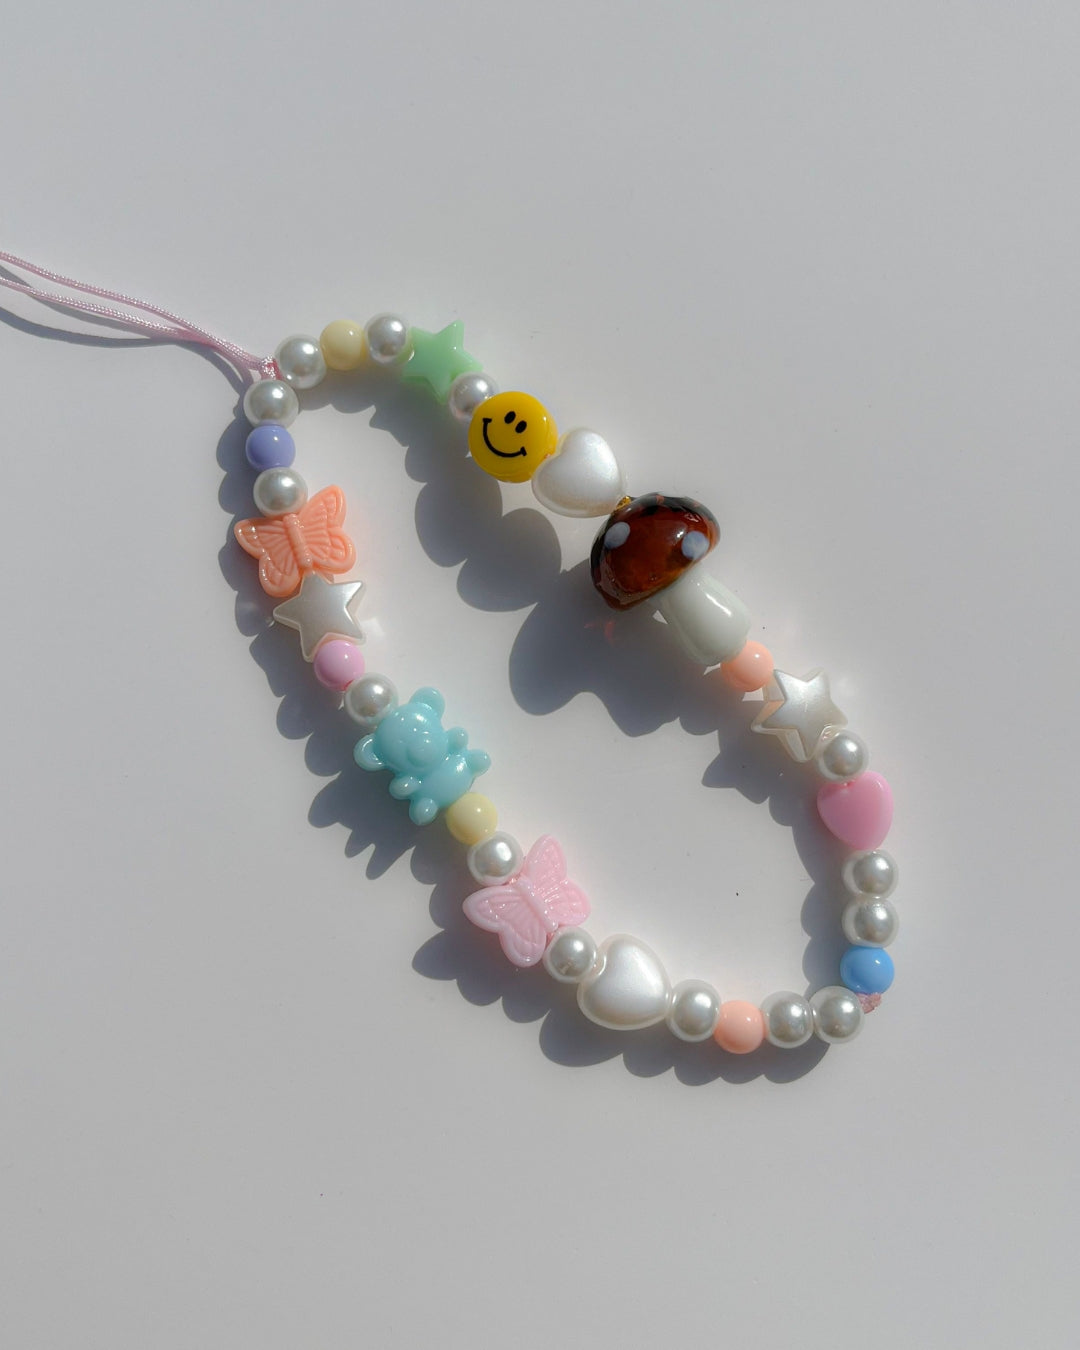 A studio shot of Buttercup Studio's Mushroom Forest Wonderland Phone Strap. Made with pearls, white star and heart beads, colourful beads, a blue bear bead, pink and orange butterfly beads, a smiley face bead and a special brown mushroom lampwork glass bead.